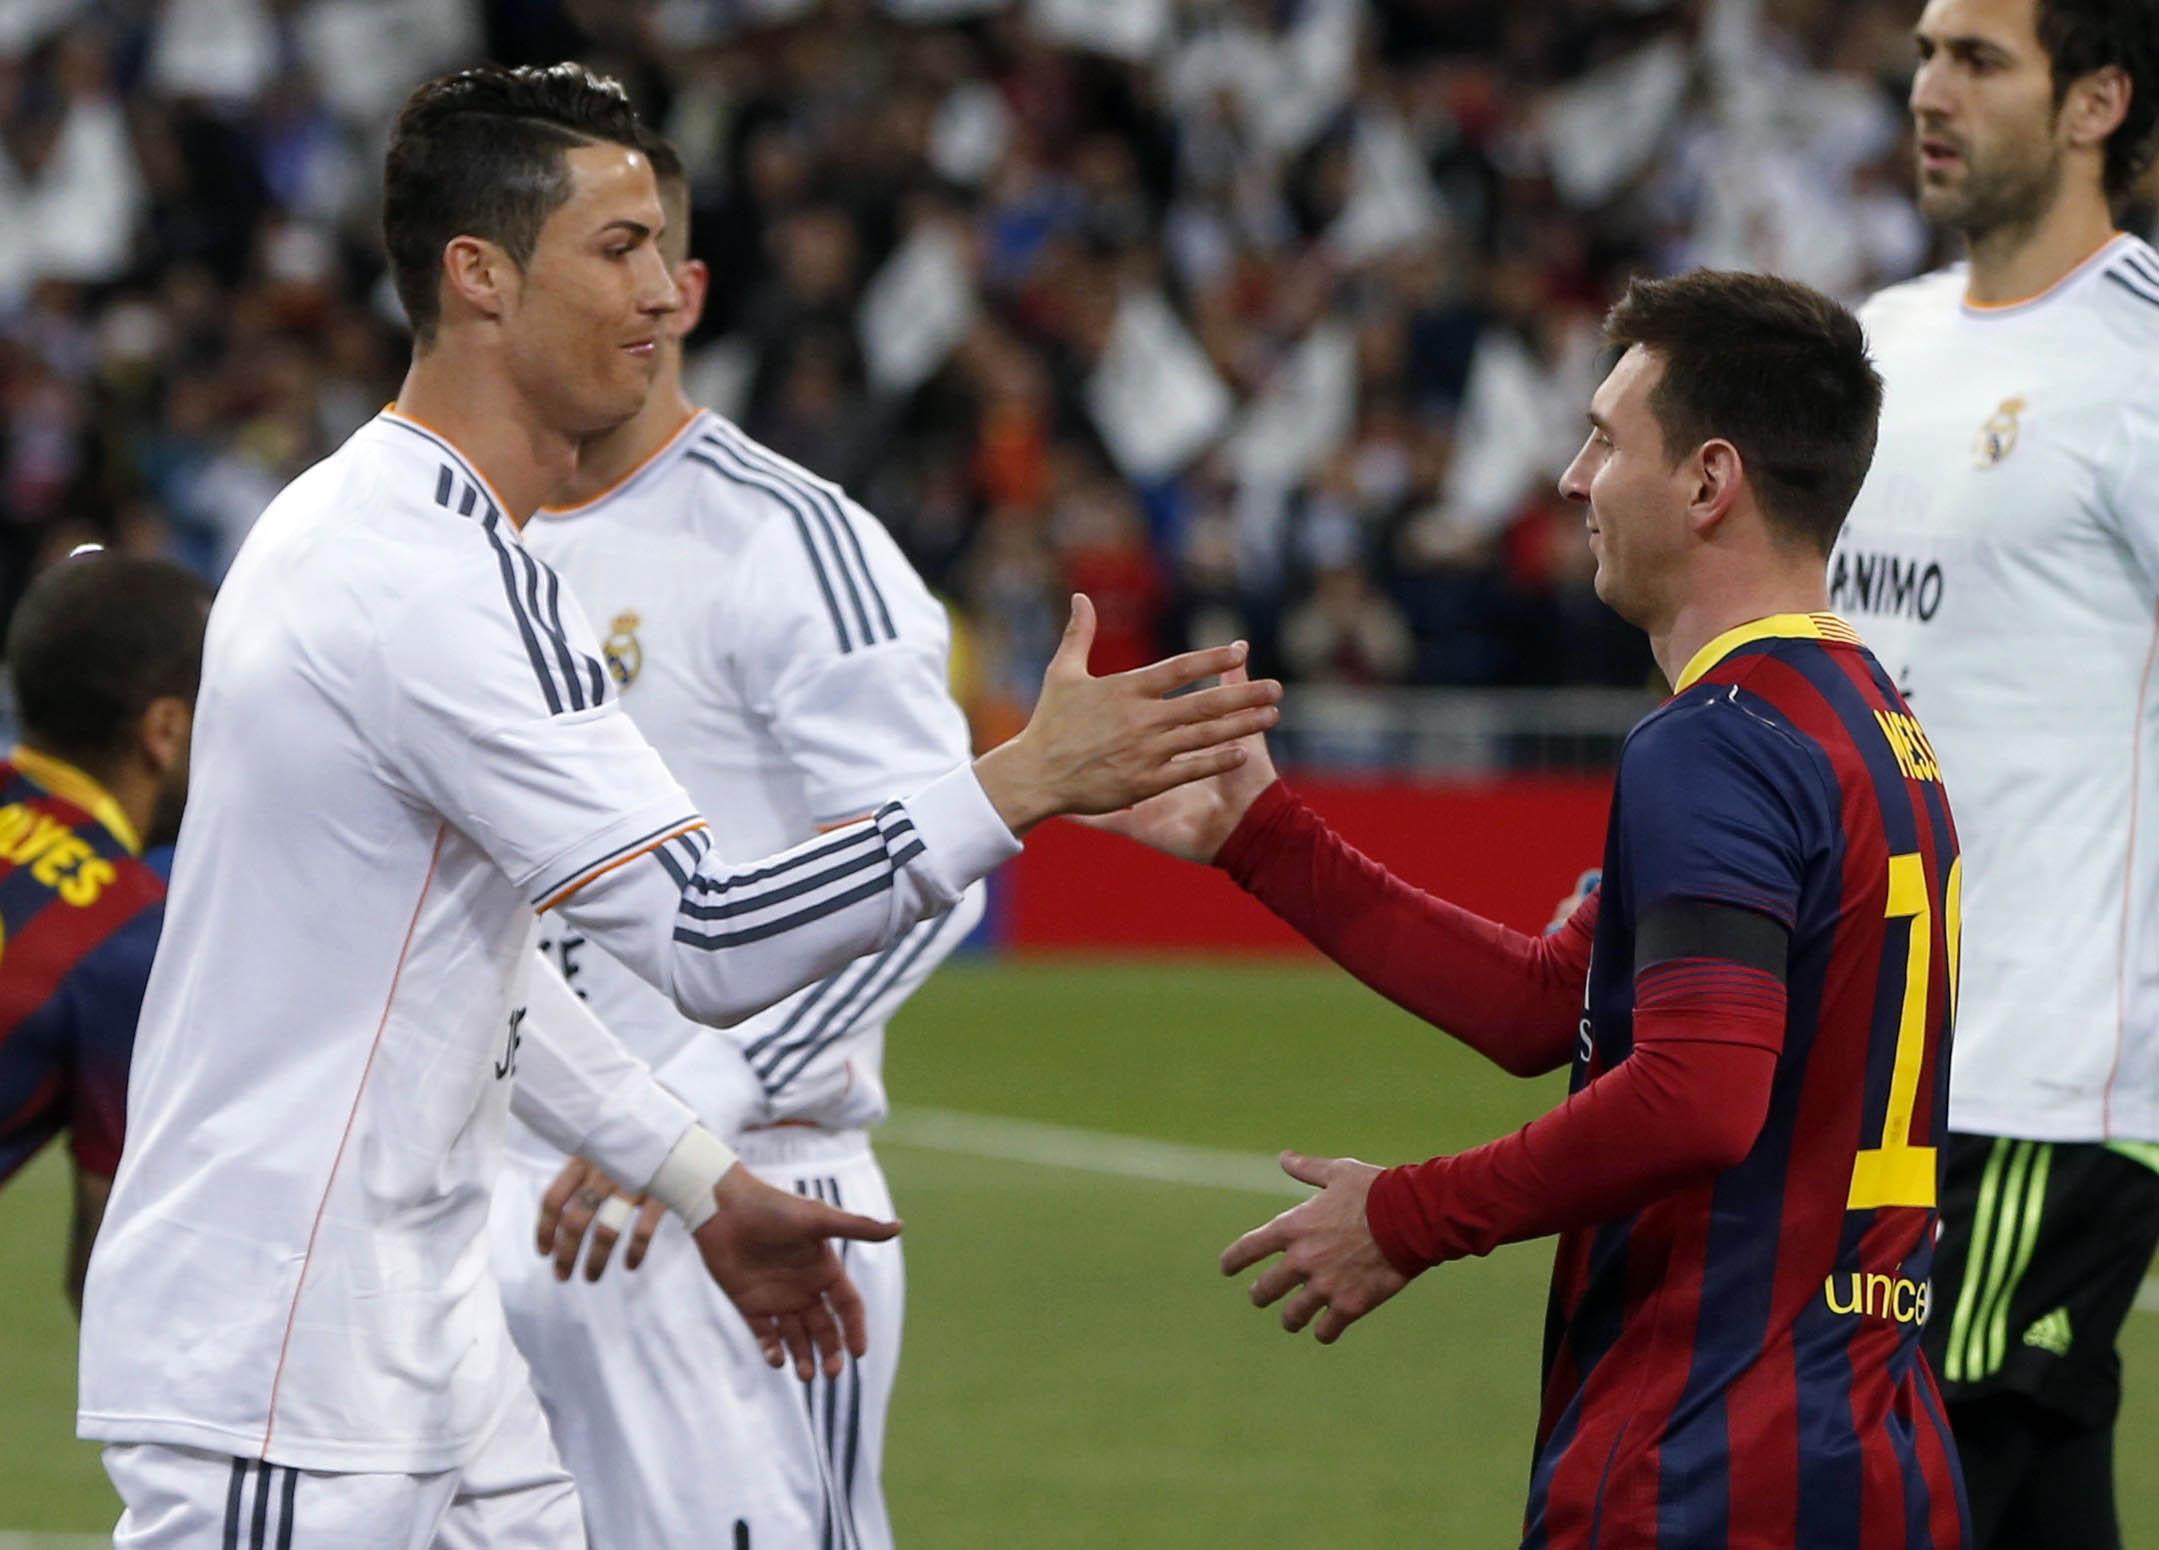 Nice to see some old friends' - Cristiano Ronaldo and Lionel Messi